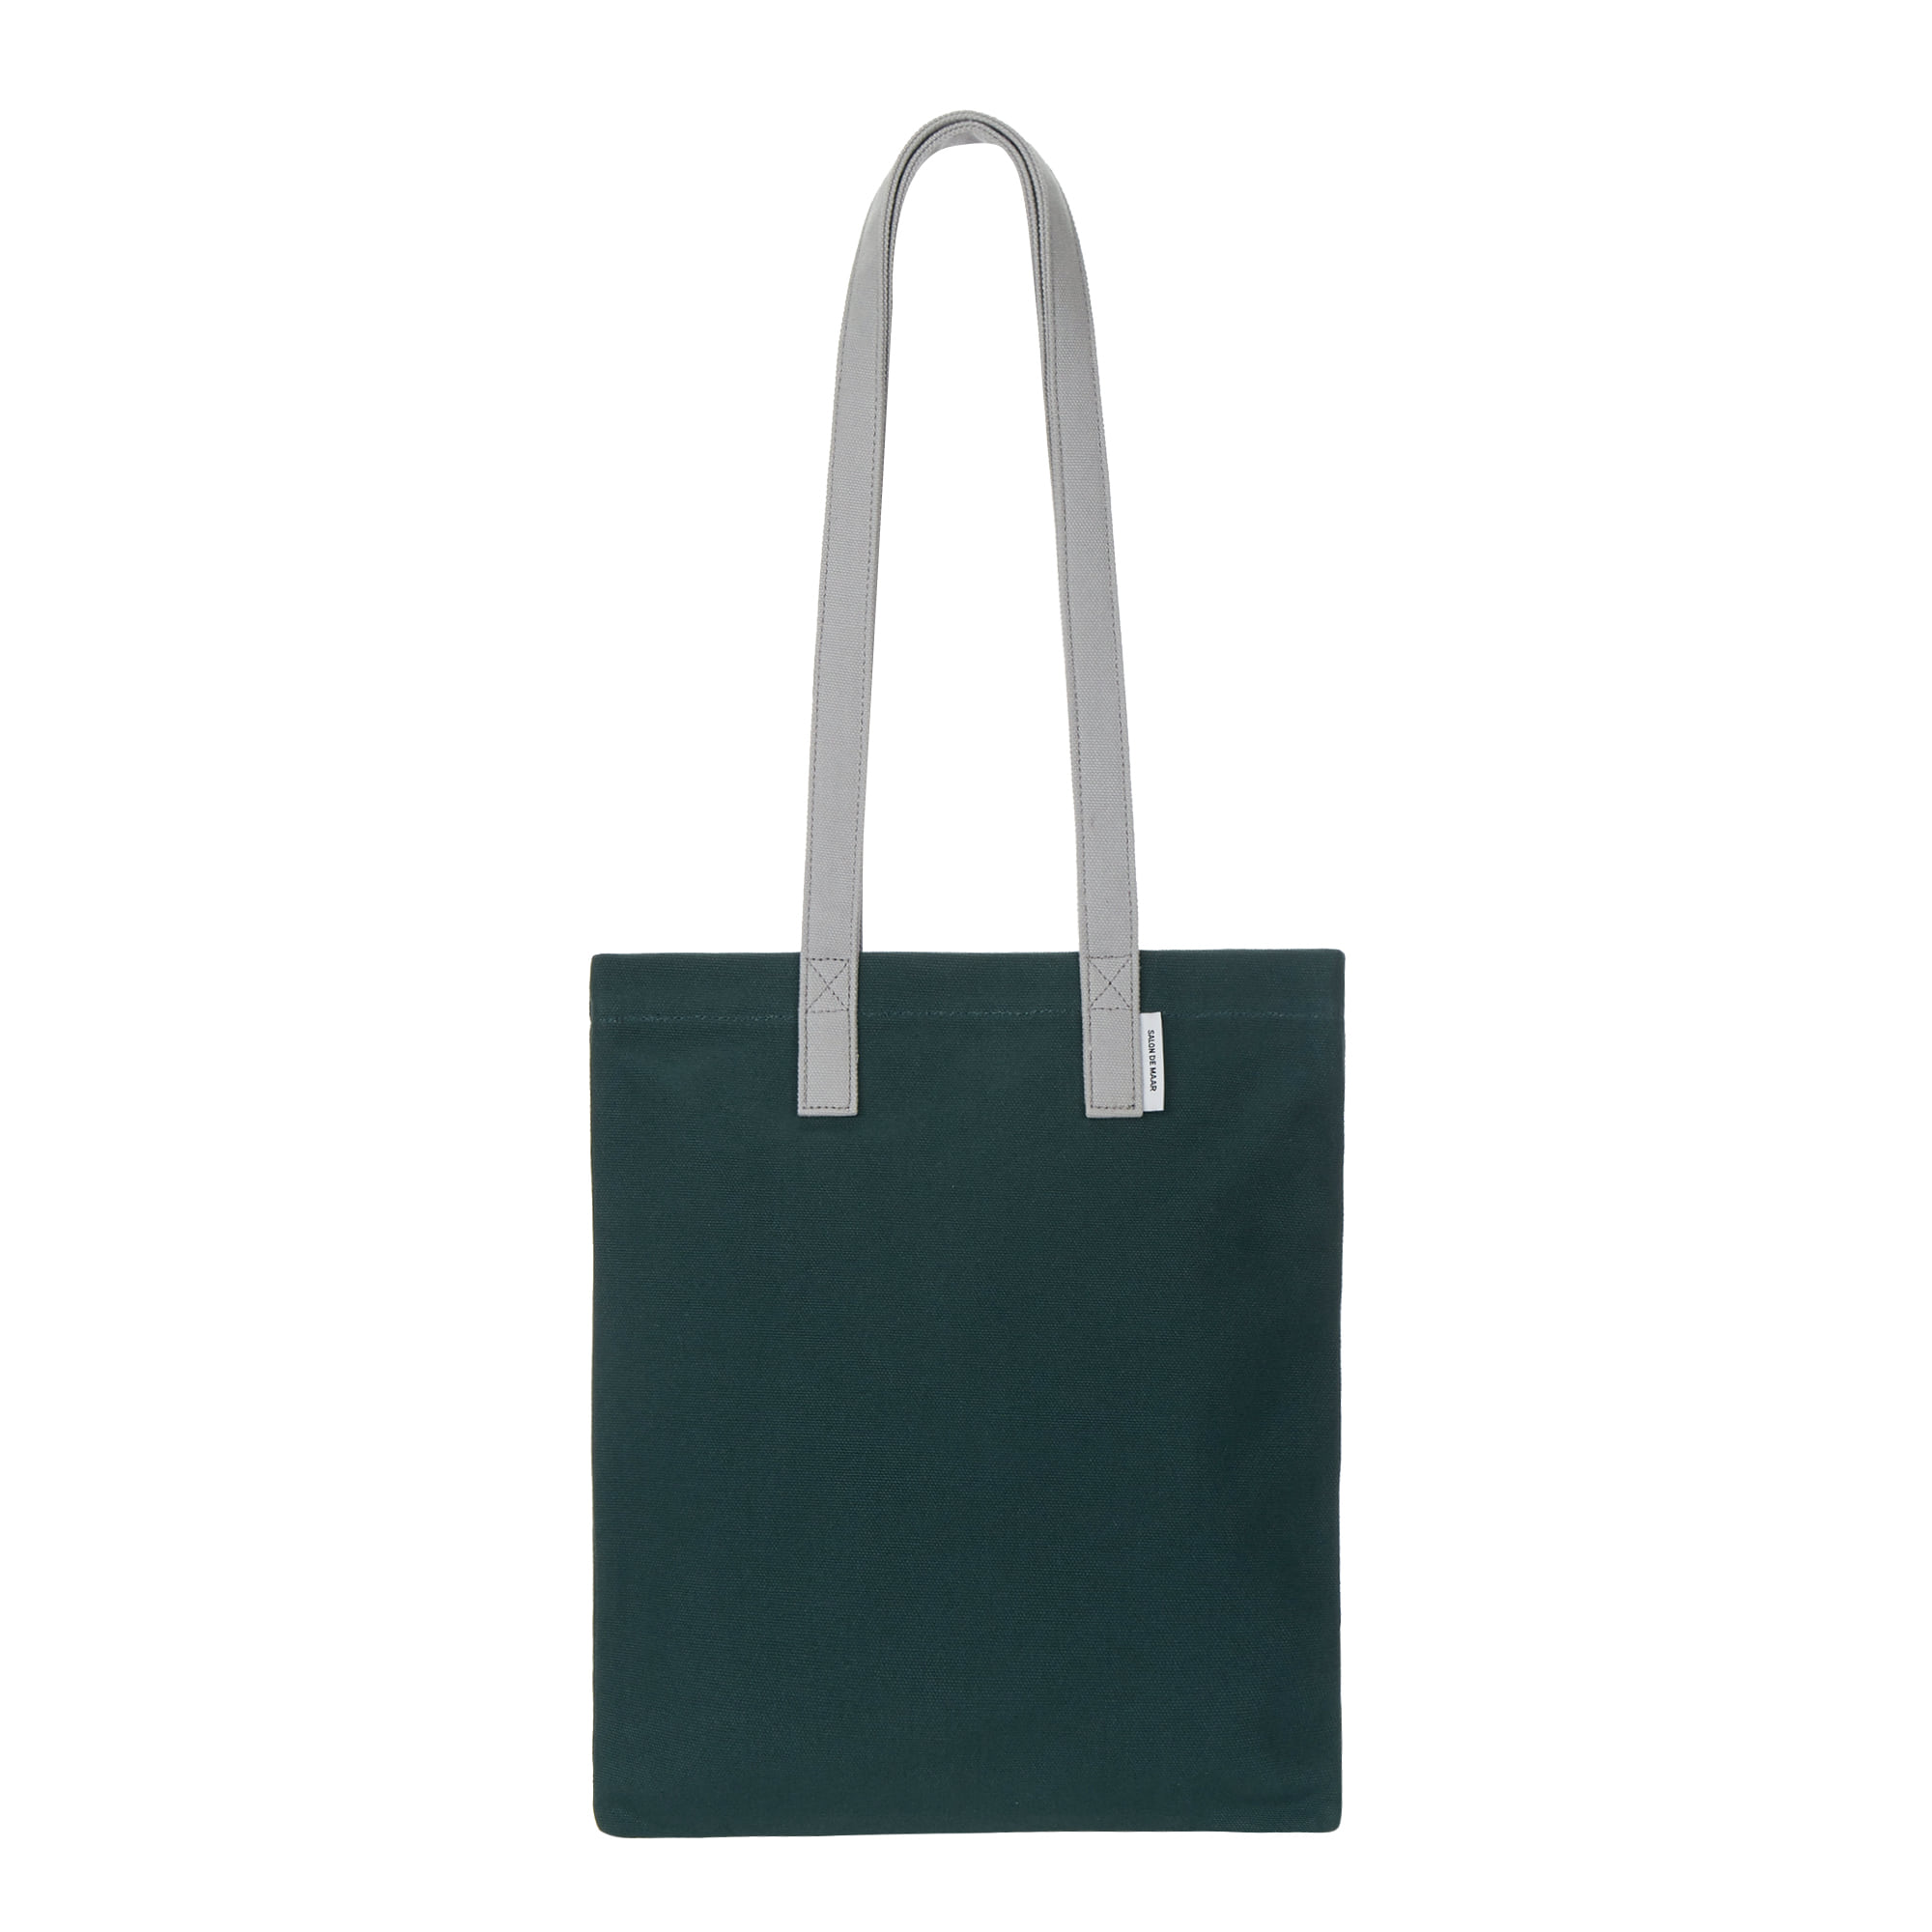 BERCY ECO-BAG FOREST GREEN